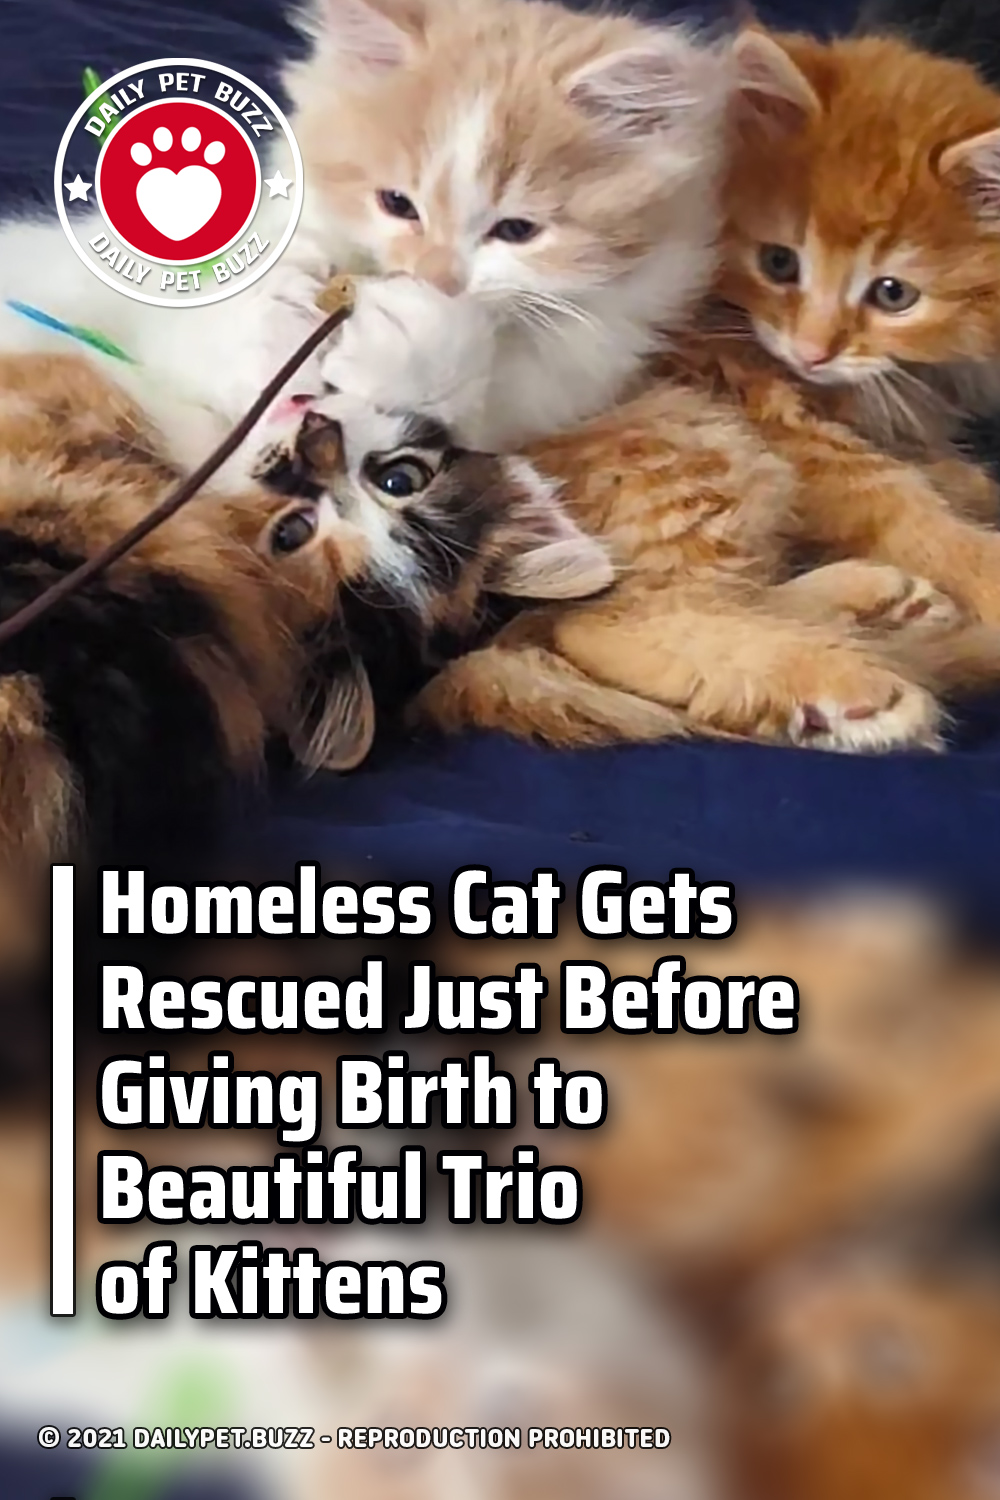 Homeless Cat Gets Rescued Just Before Giving Birth to Beautiful Trio of Kittens